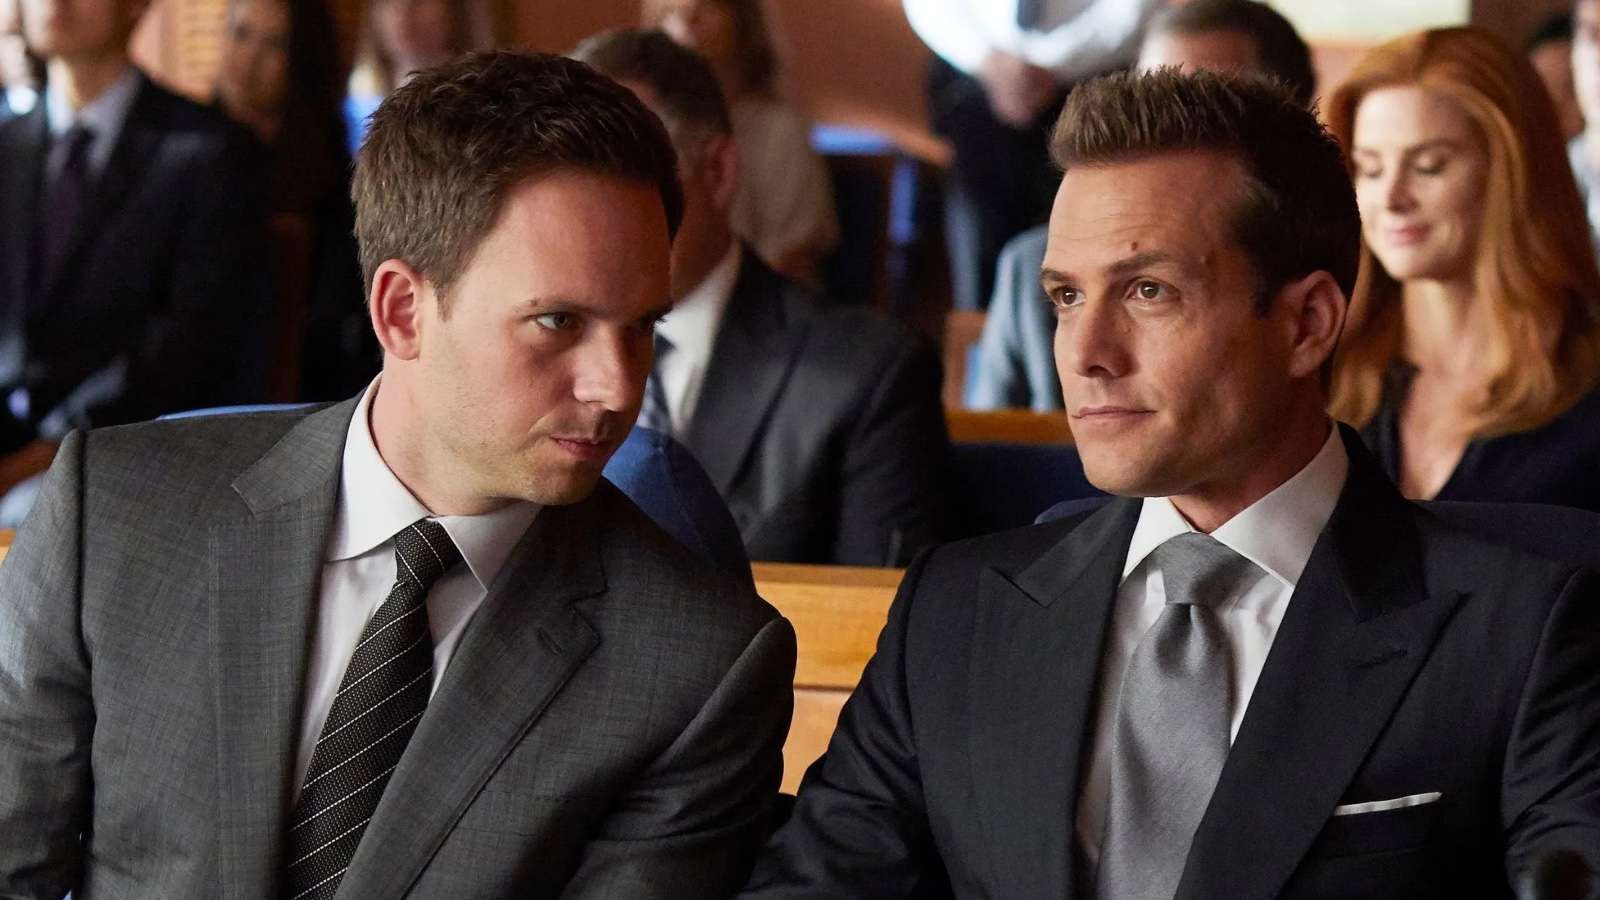 Patrick J. Adams and Gabriel Macht for Suits as Michael and Harvey